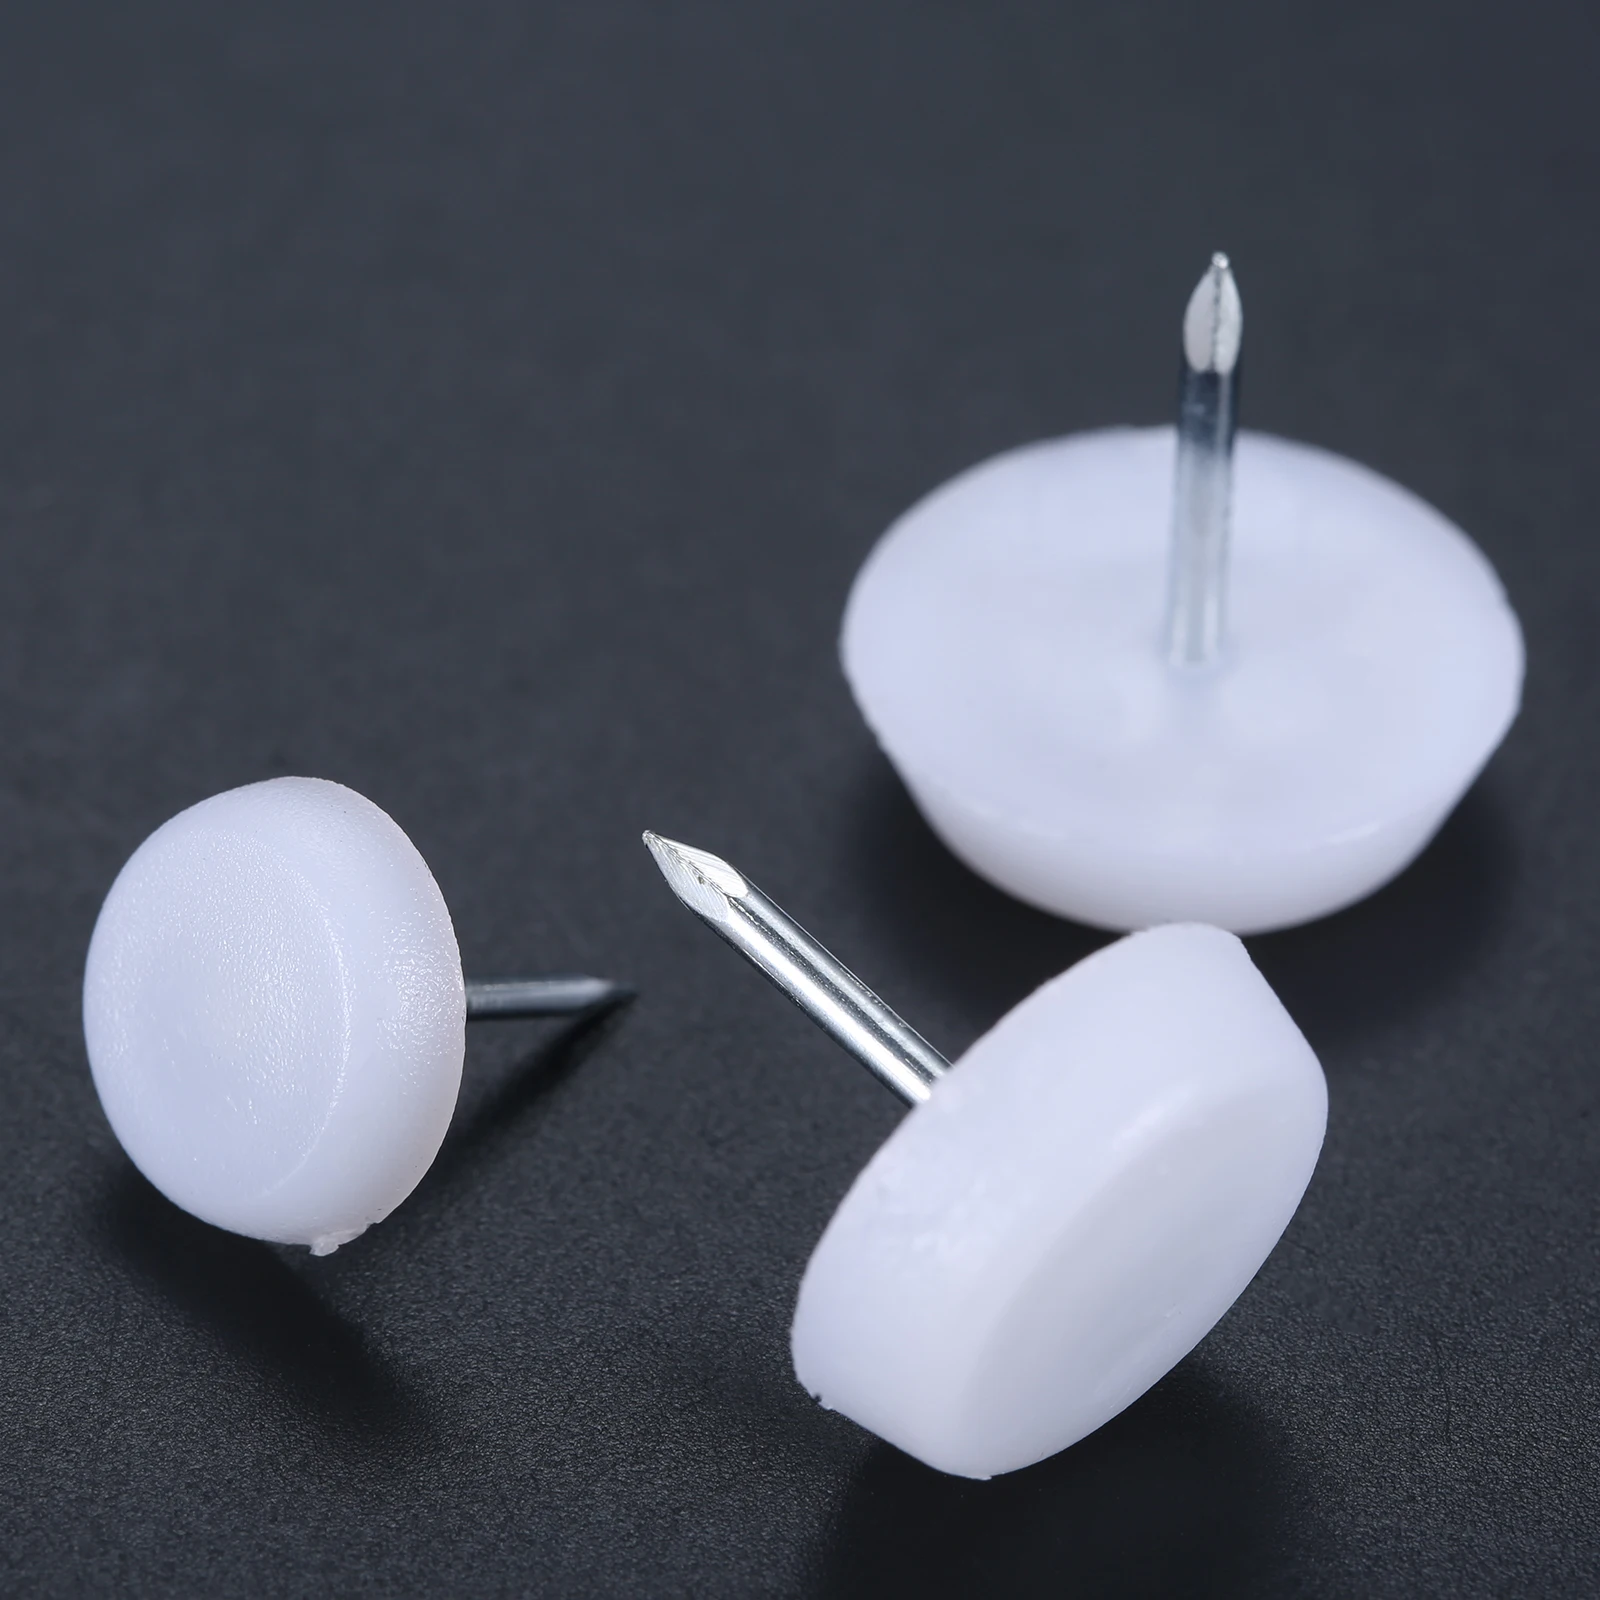 50pcs Furniture Feet Nails Stick-on Glide Skid Pad Screw-in 14/18/20mm Lat-Bottom Round Chair Table Leg Protector White Plastic